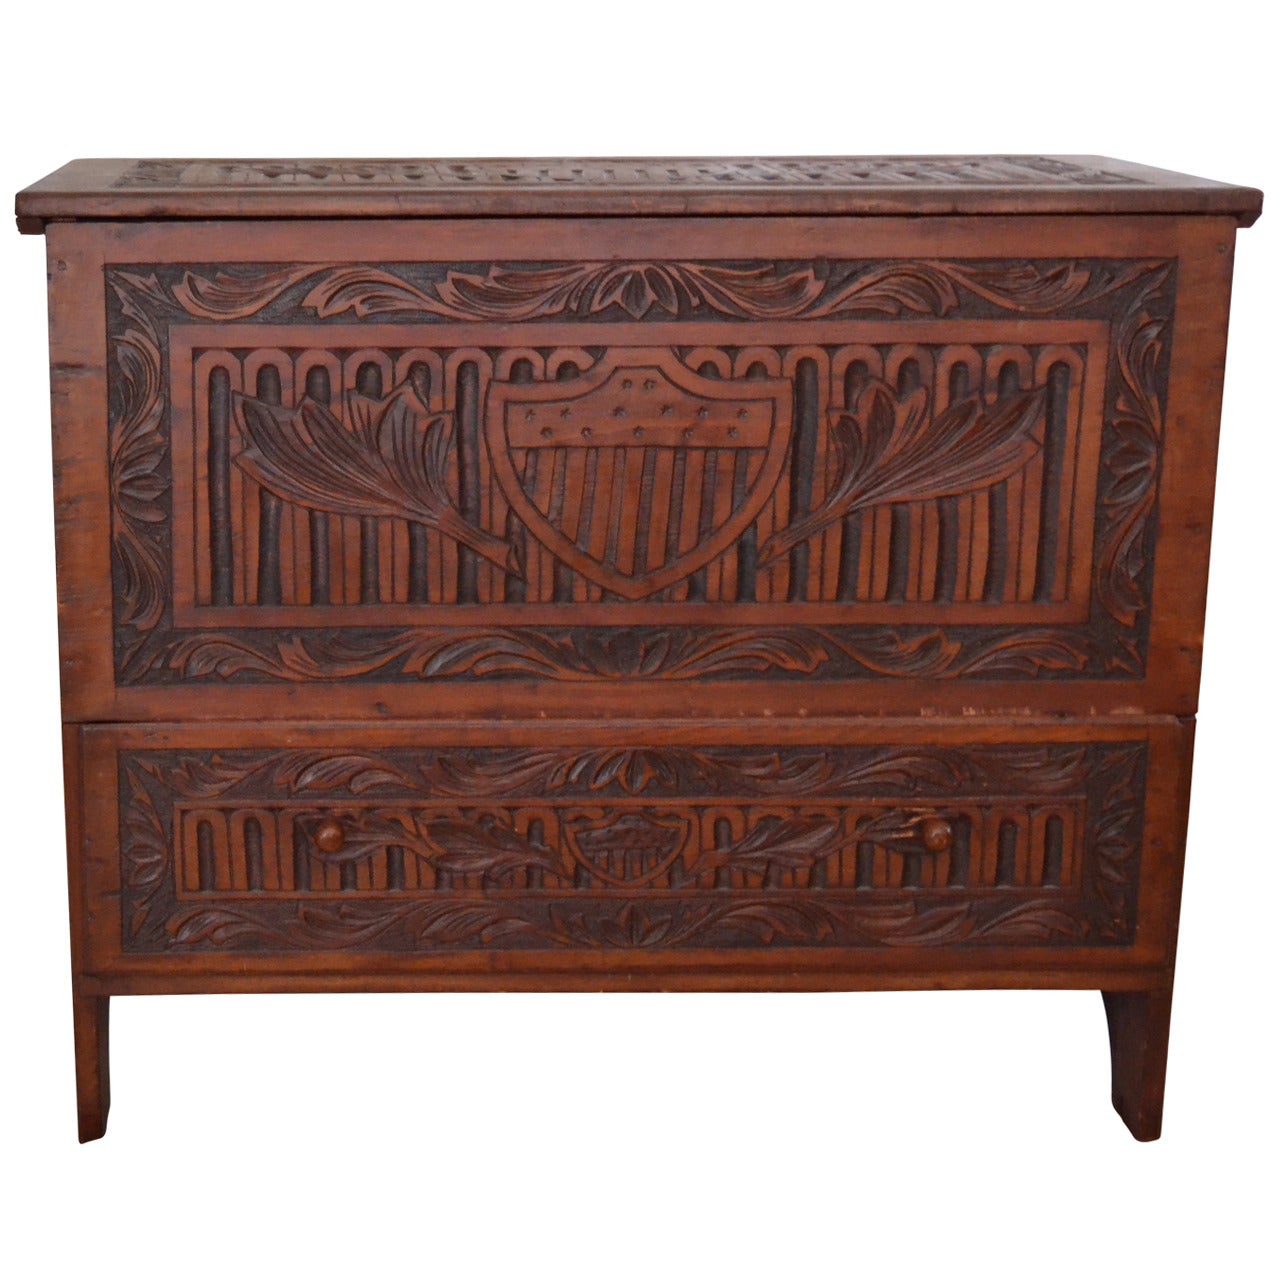 New England Blanket Chest with Patriotic Carving For Sale